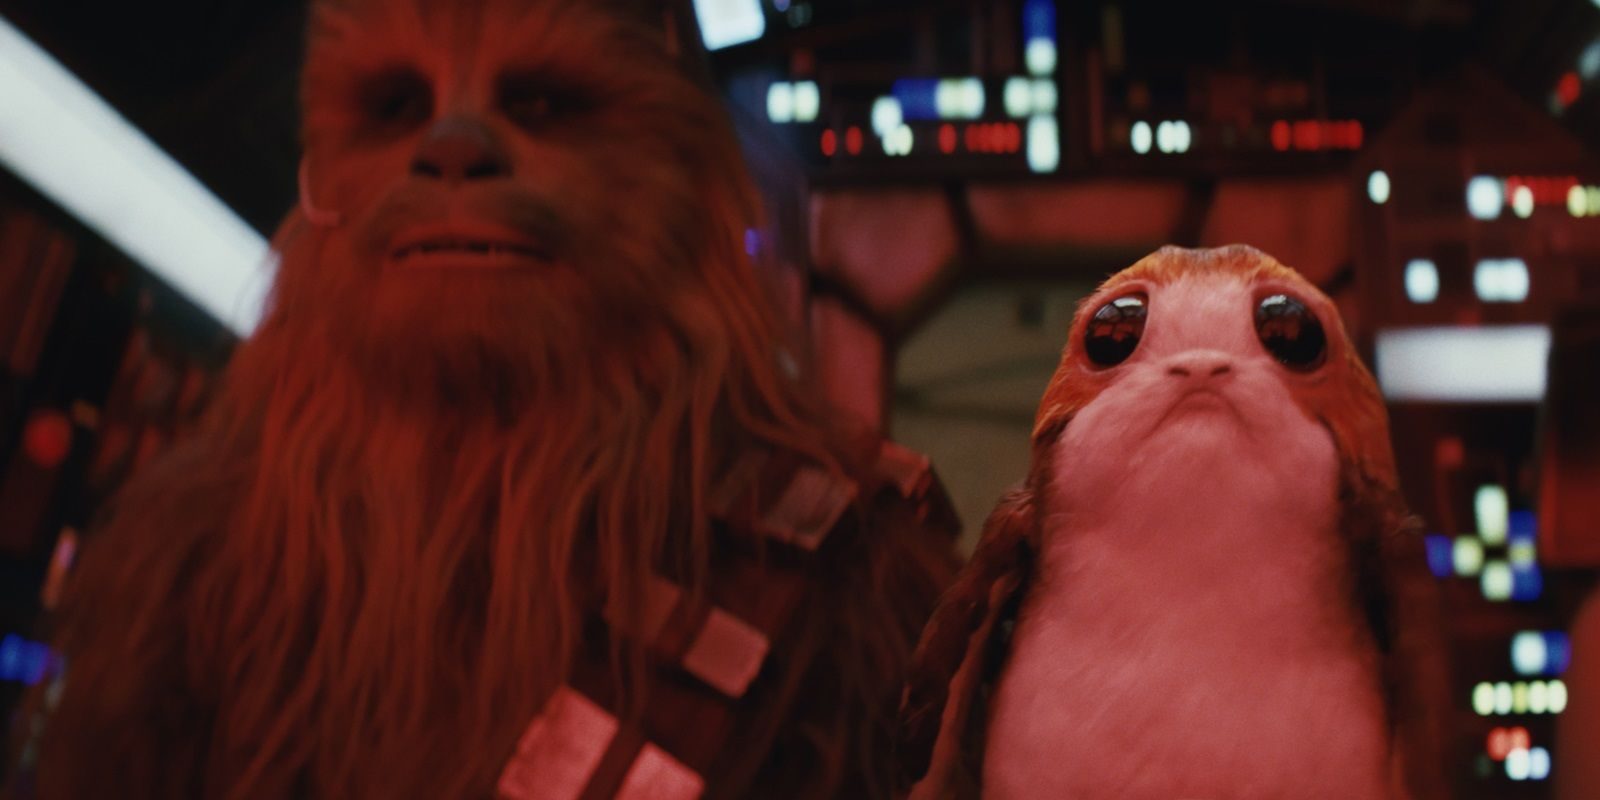 chewbacca-and-a-porg-on-the-millennium-falcon-in-star-wars-the-last-jedi-5094236